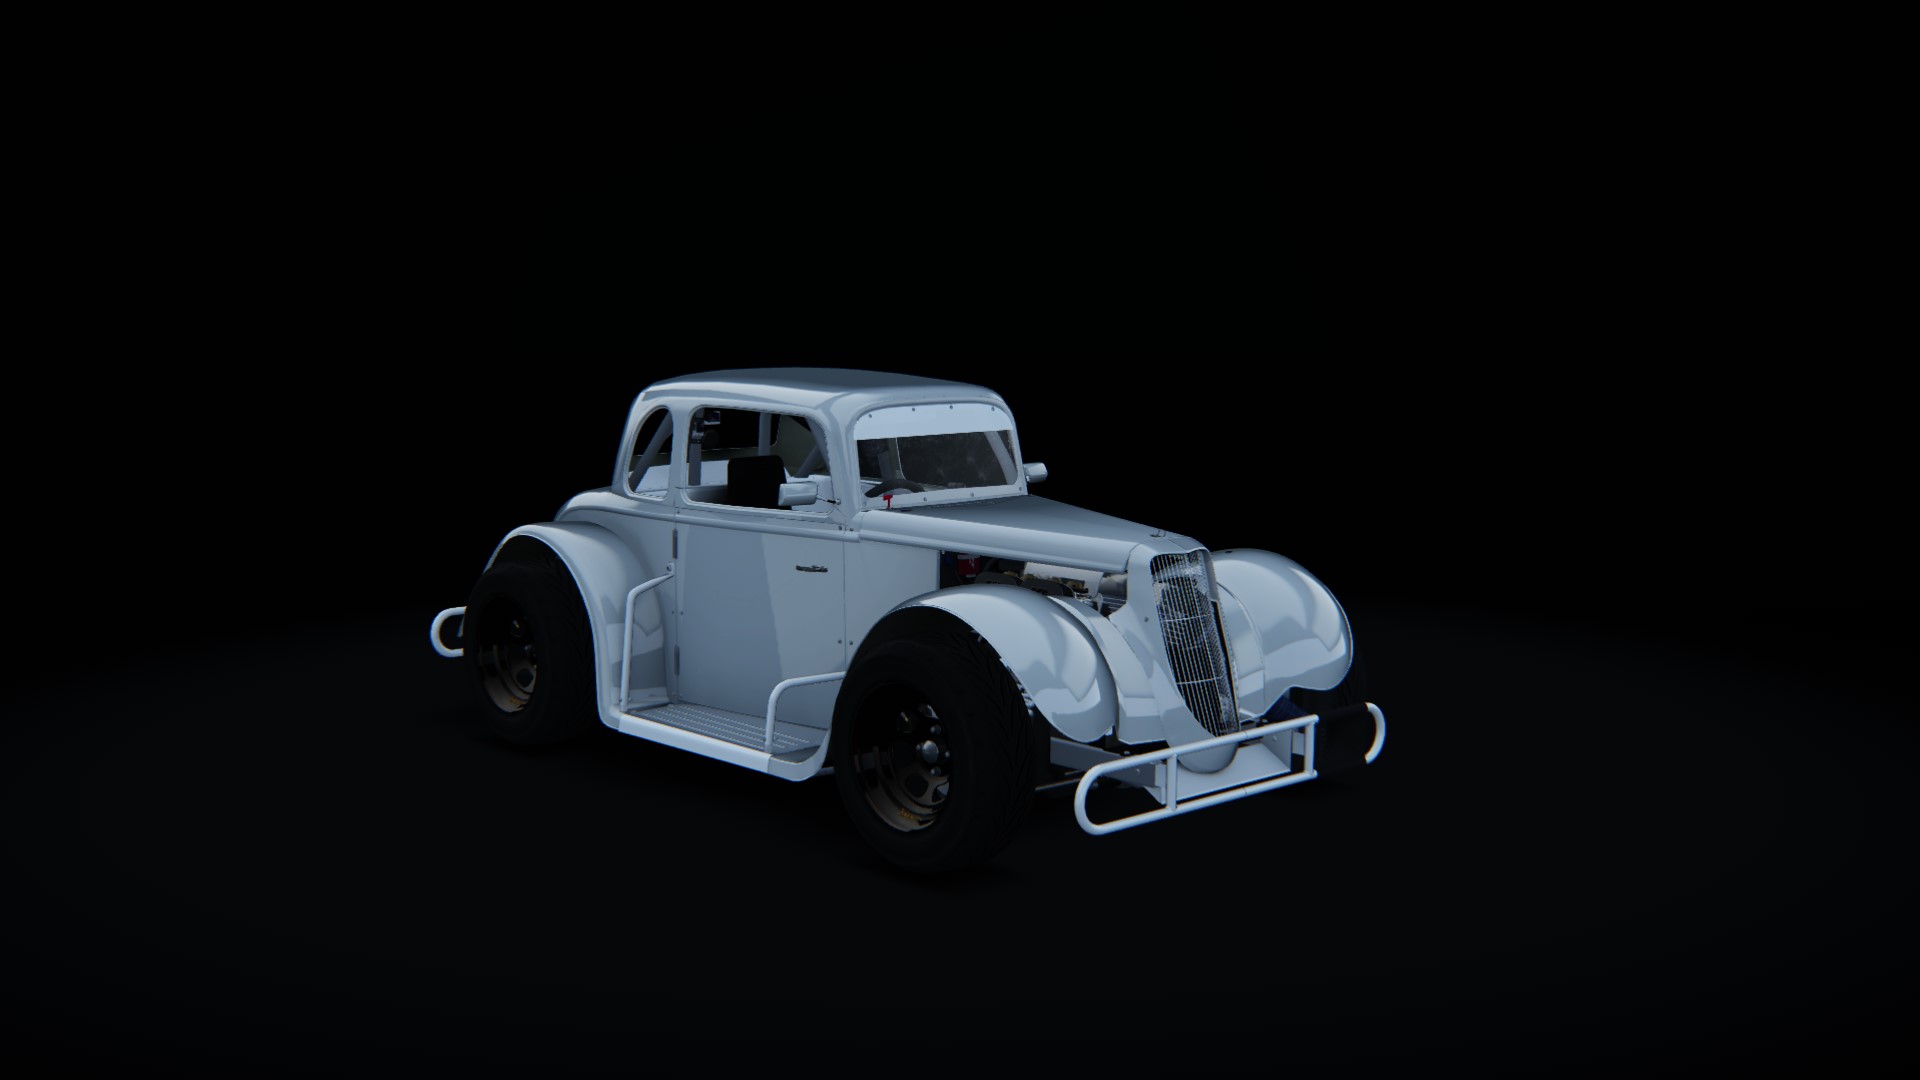 Legends Ford 34 coupe, skin 46